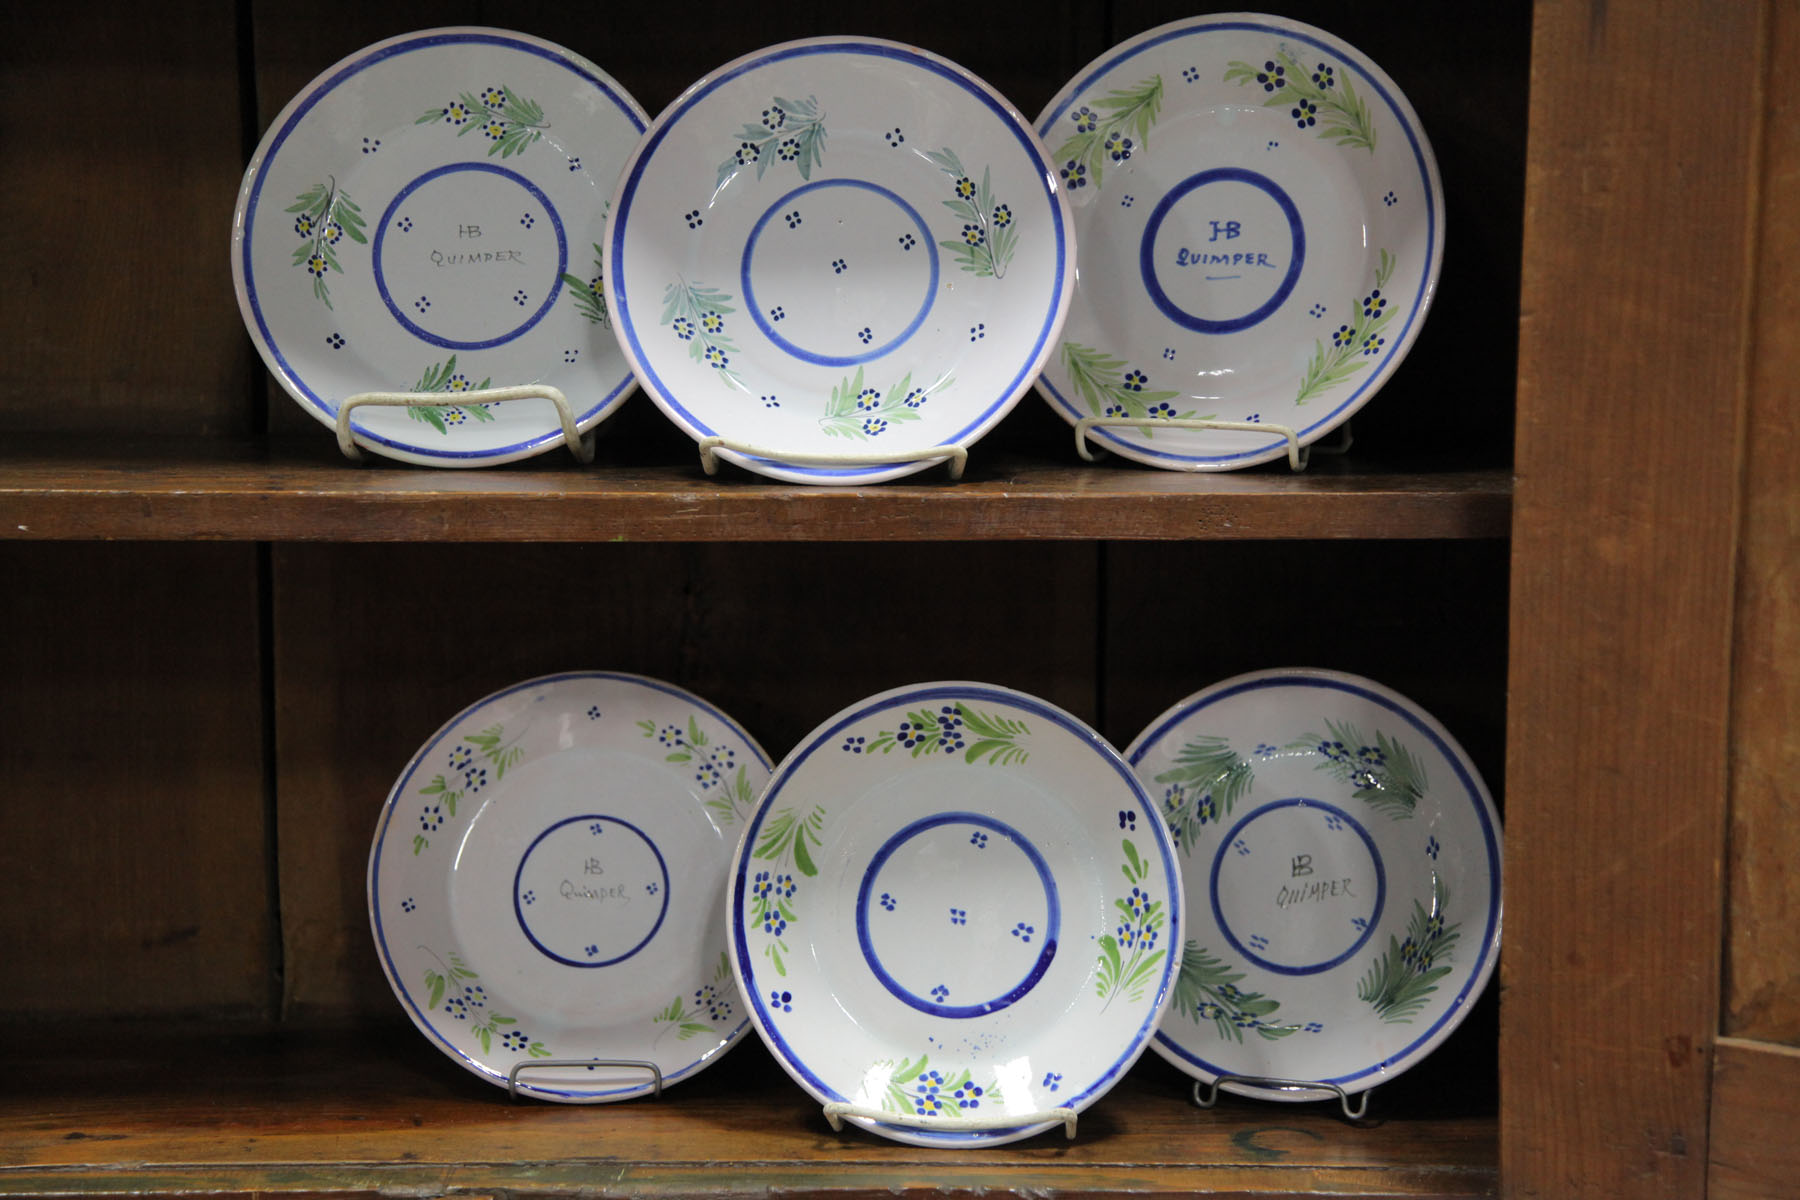 SIX QUIMPER PLATES.  France  first